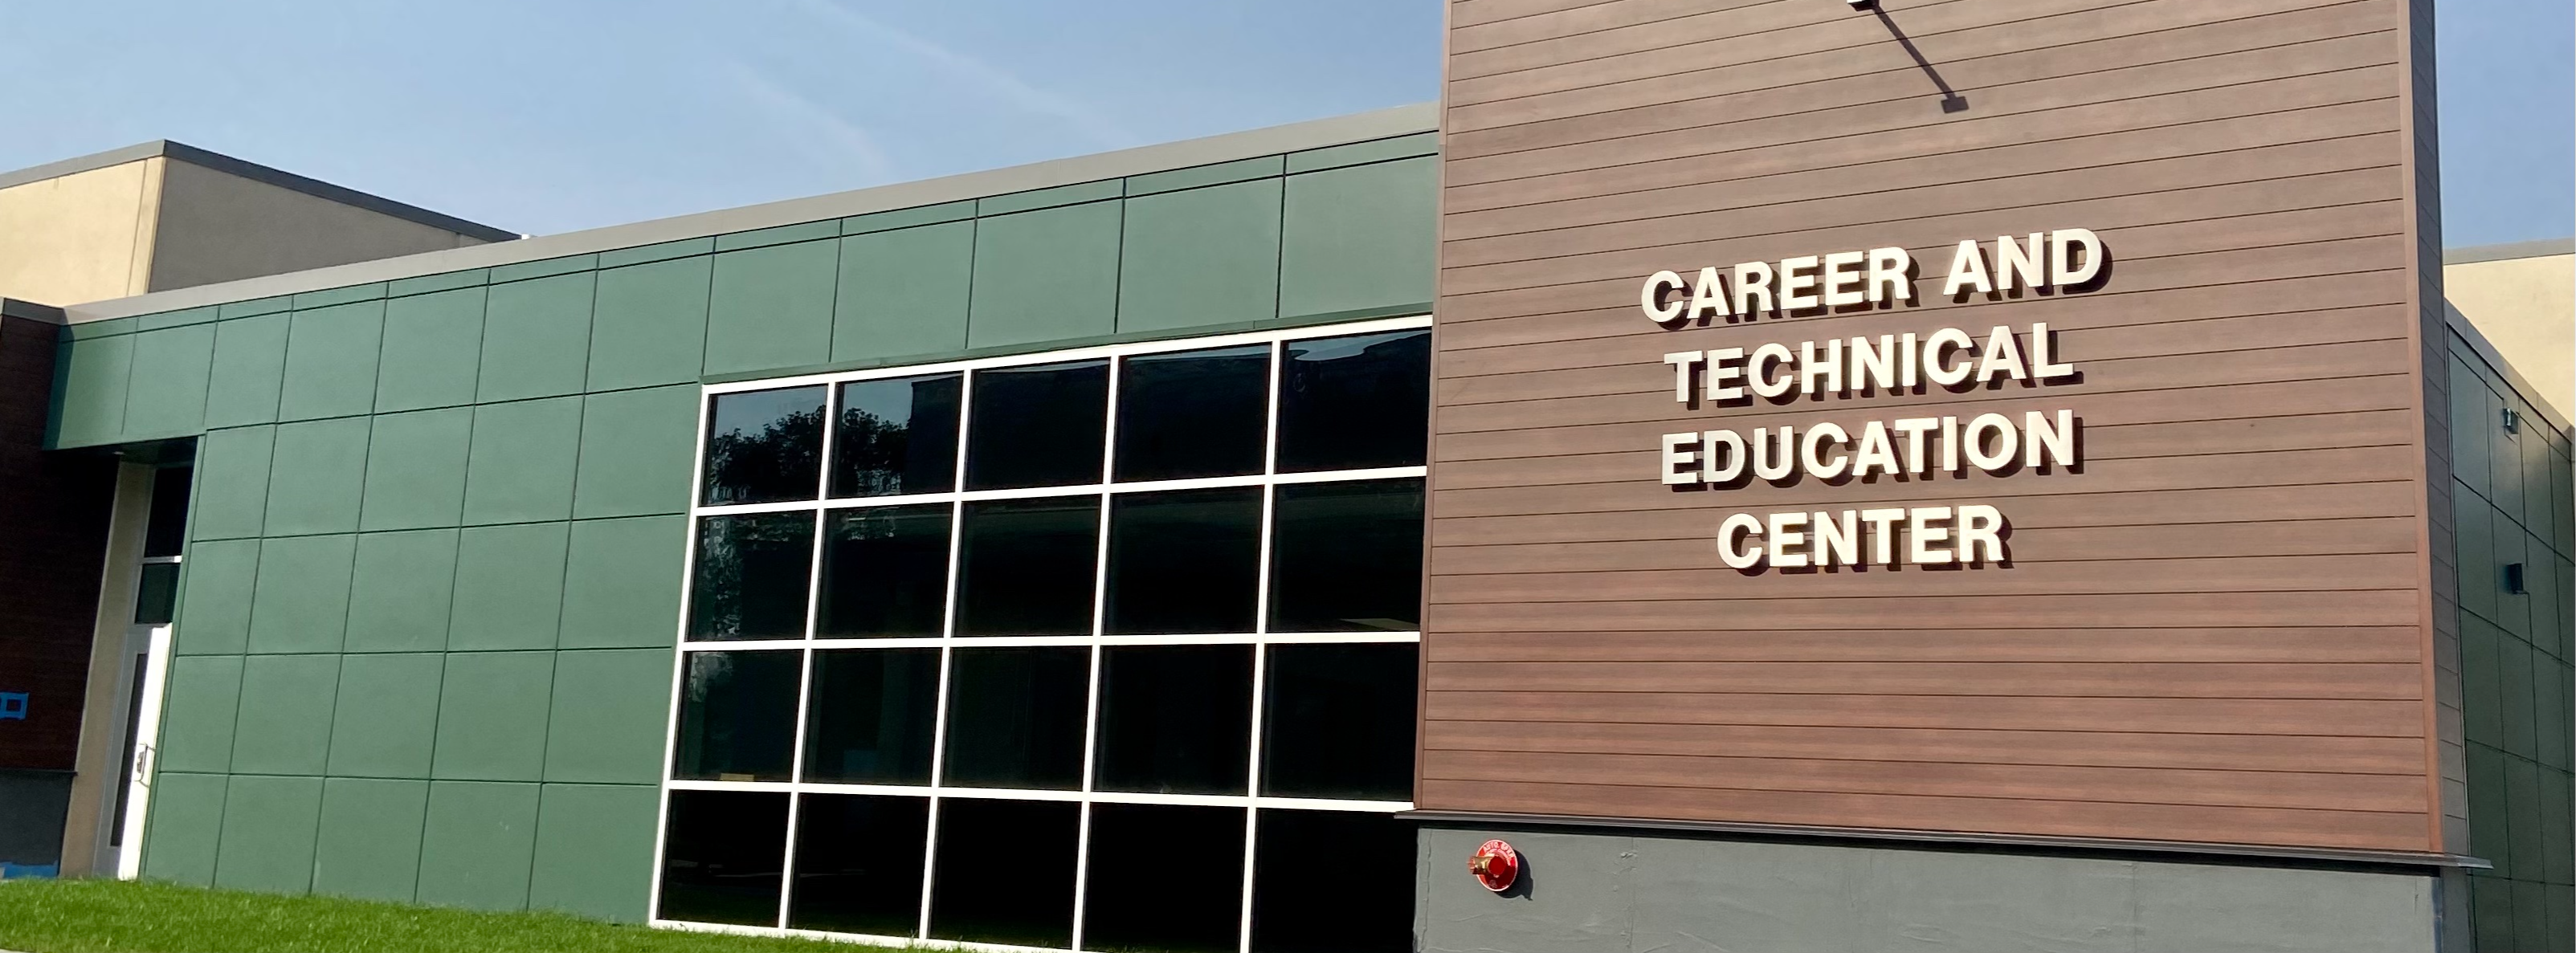 Career and Technical Education Center open house scheduled for Oct. 4